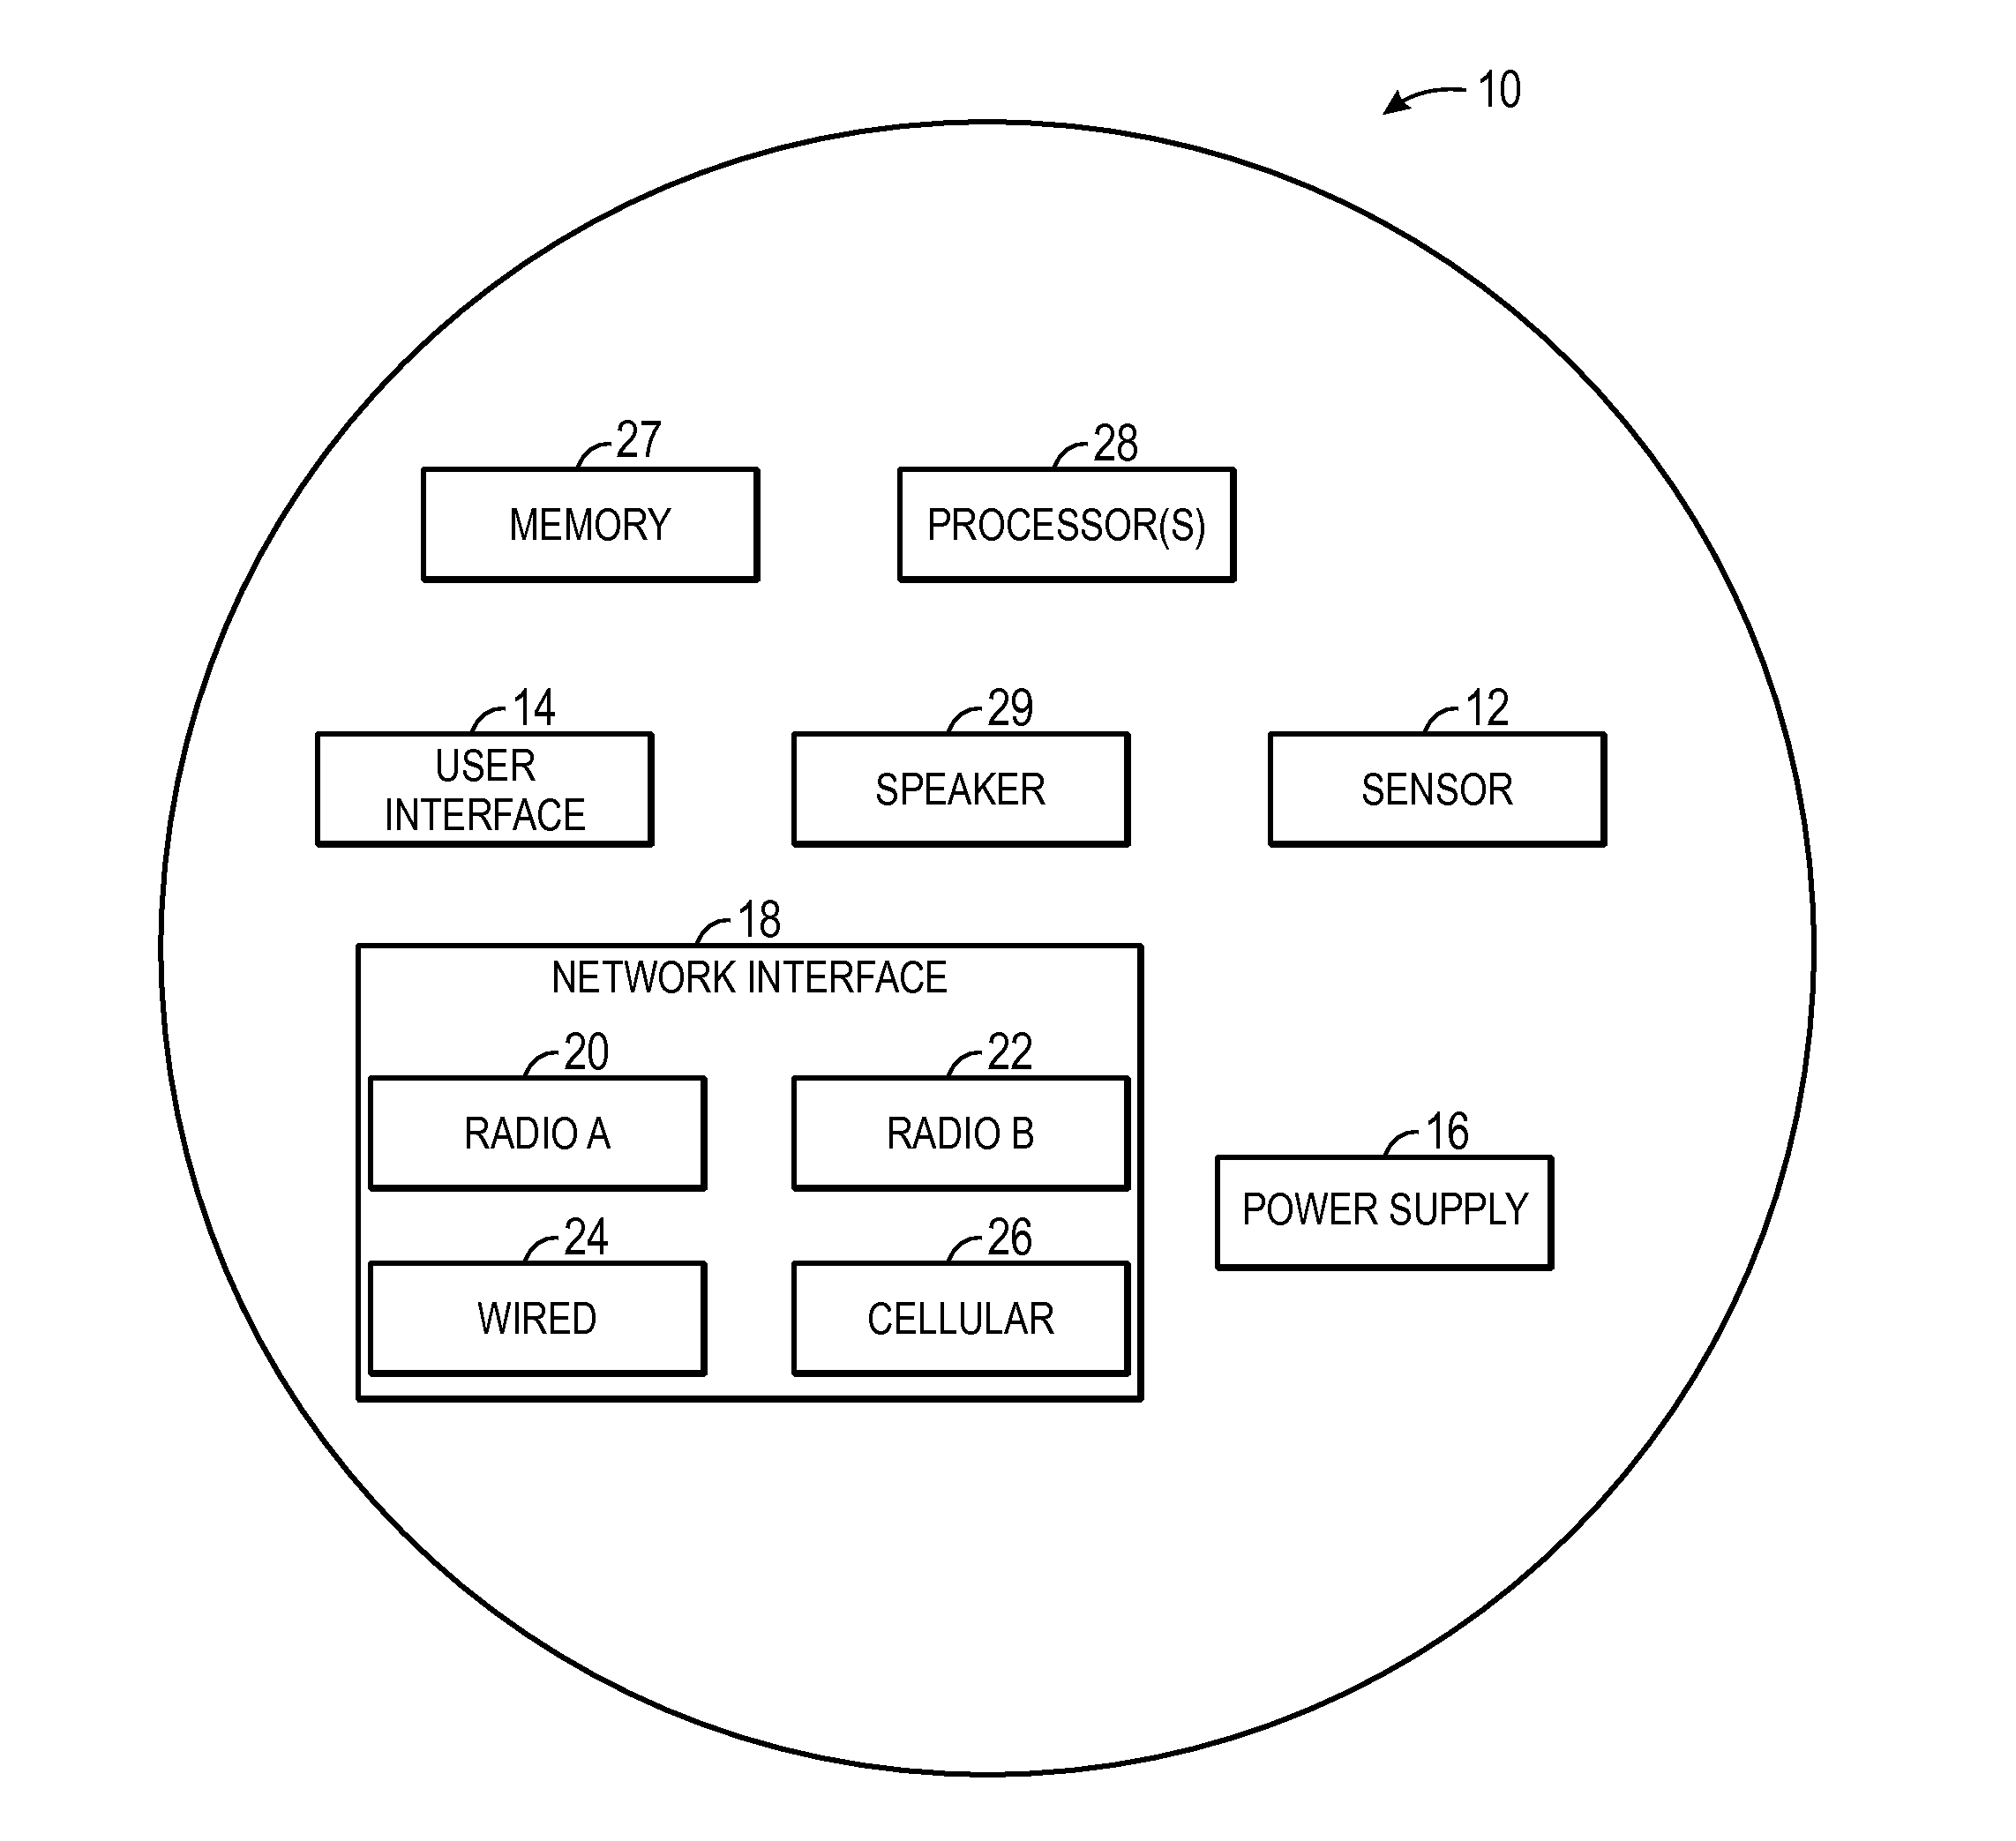 Enhanced automated environmental control system scheduling using a preference function